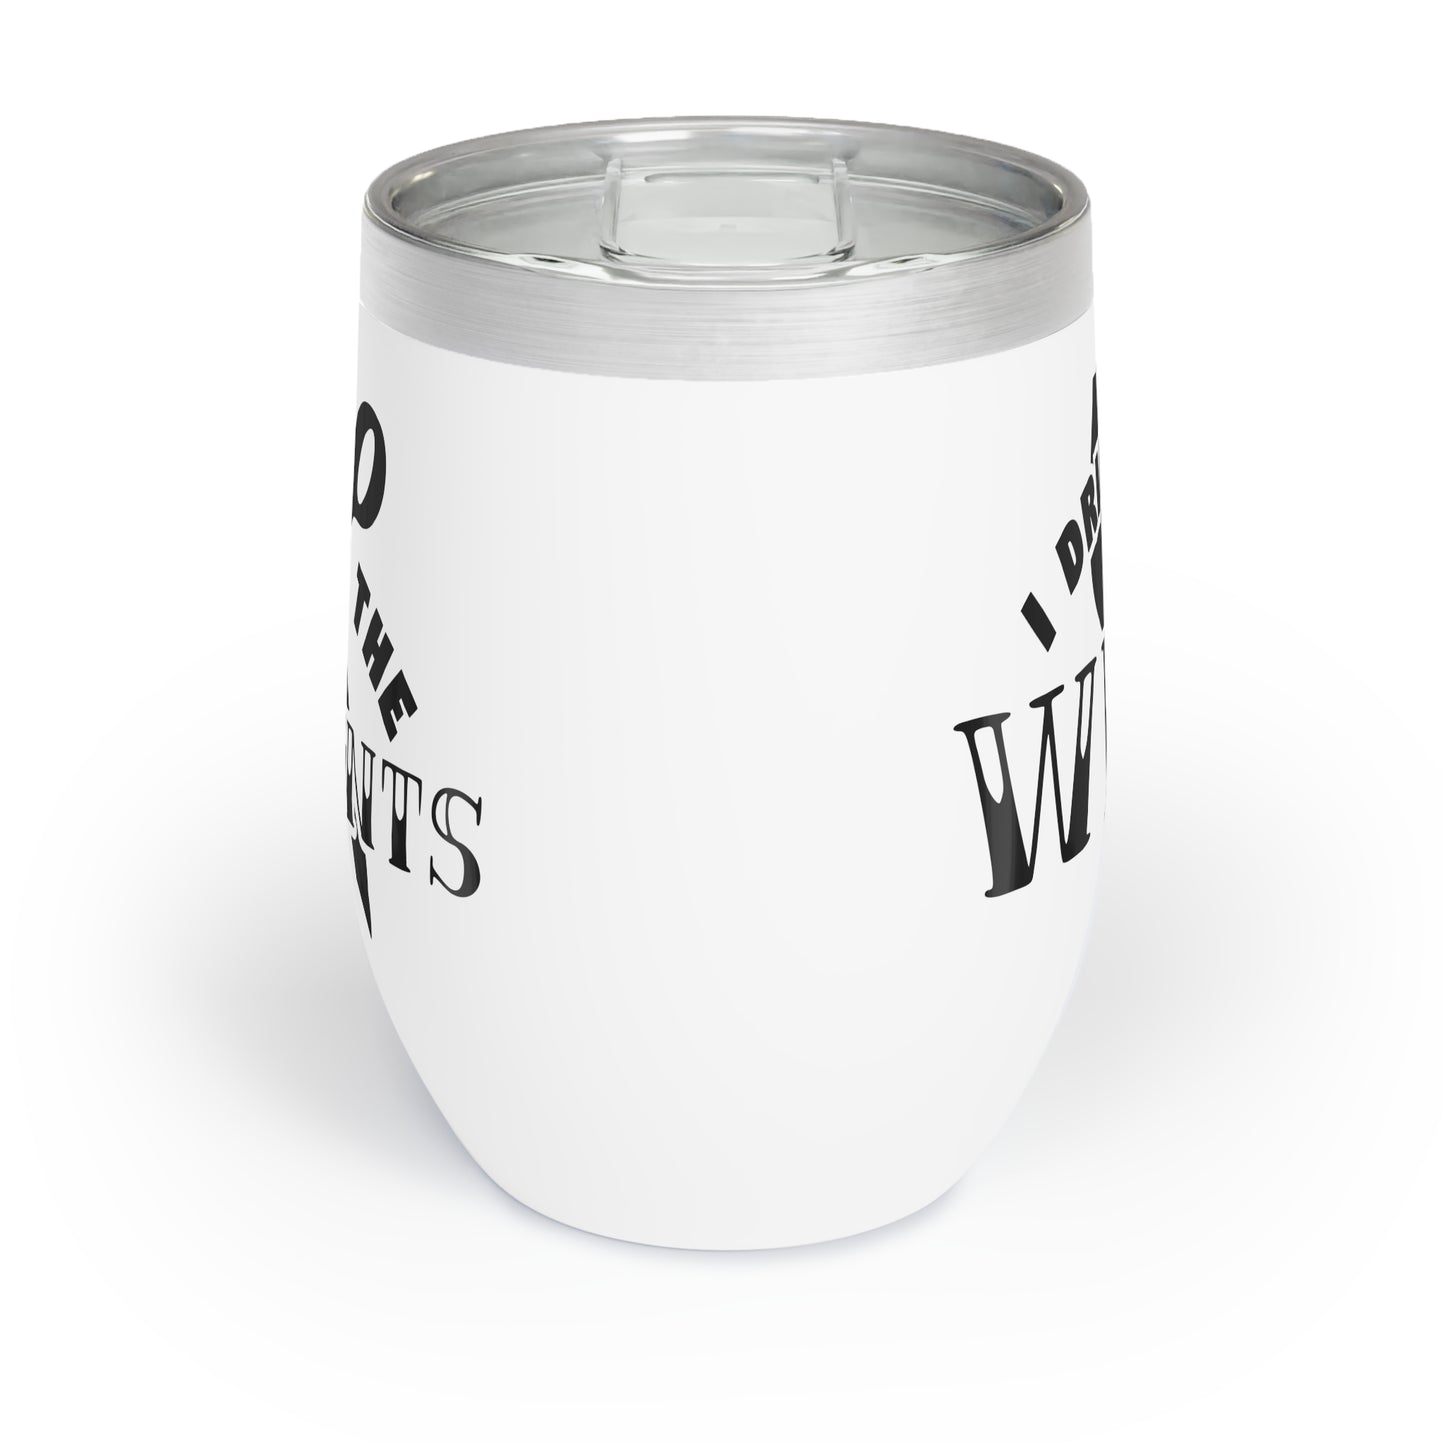 I Drink The Wine I Wrap The Presents Chill Wine Tumbler